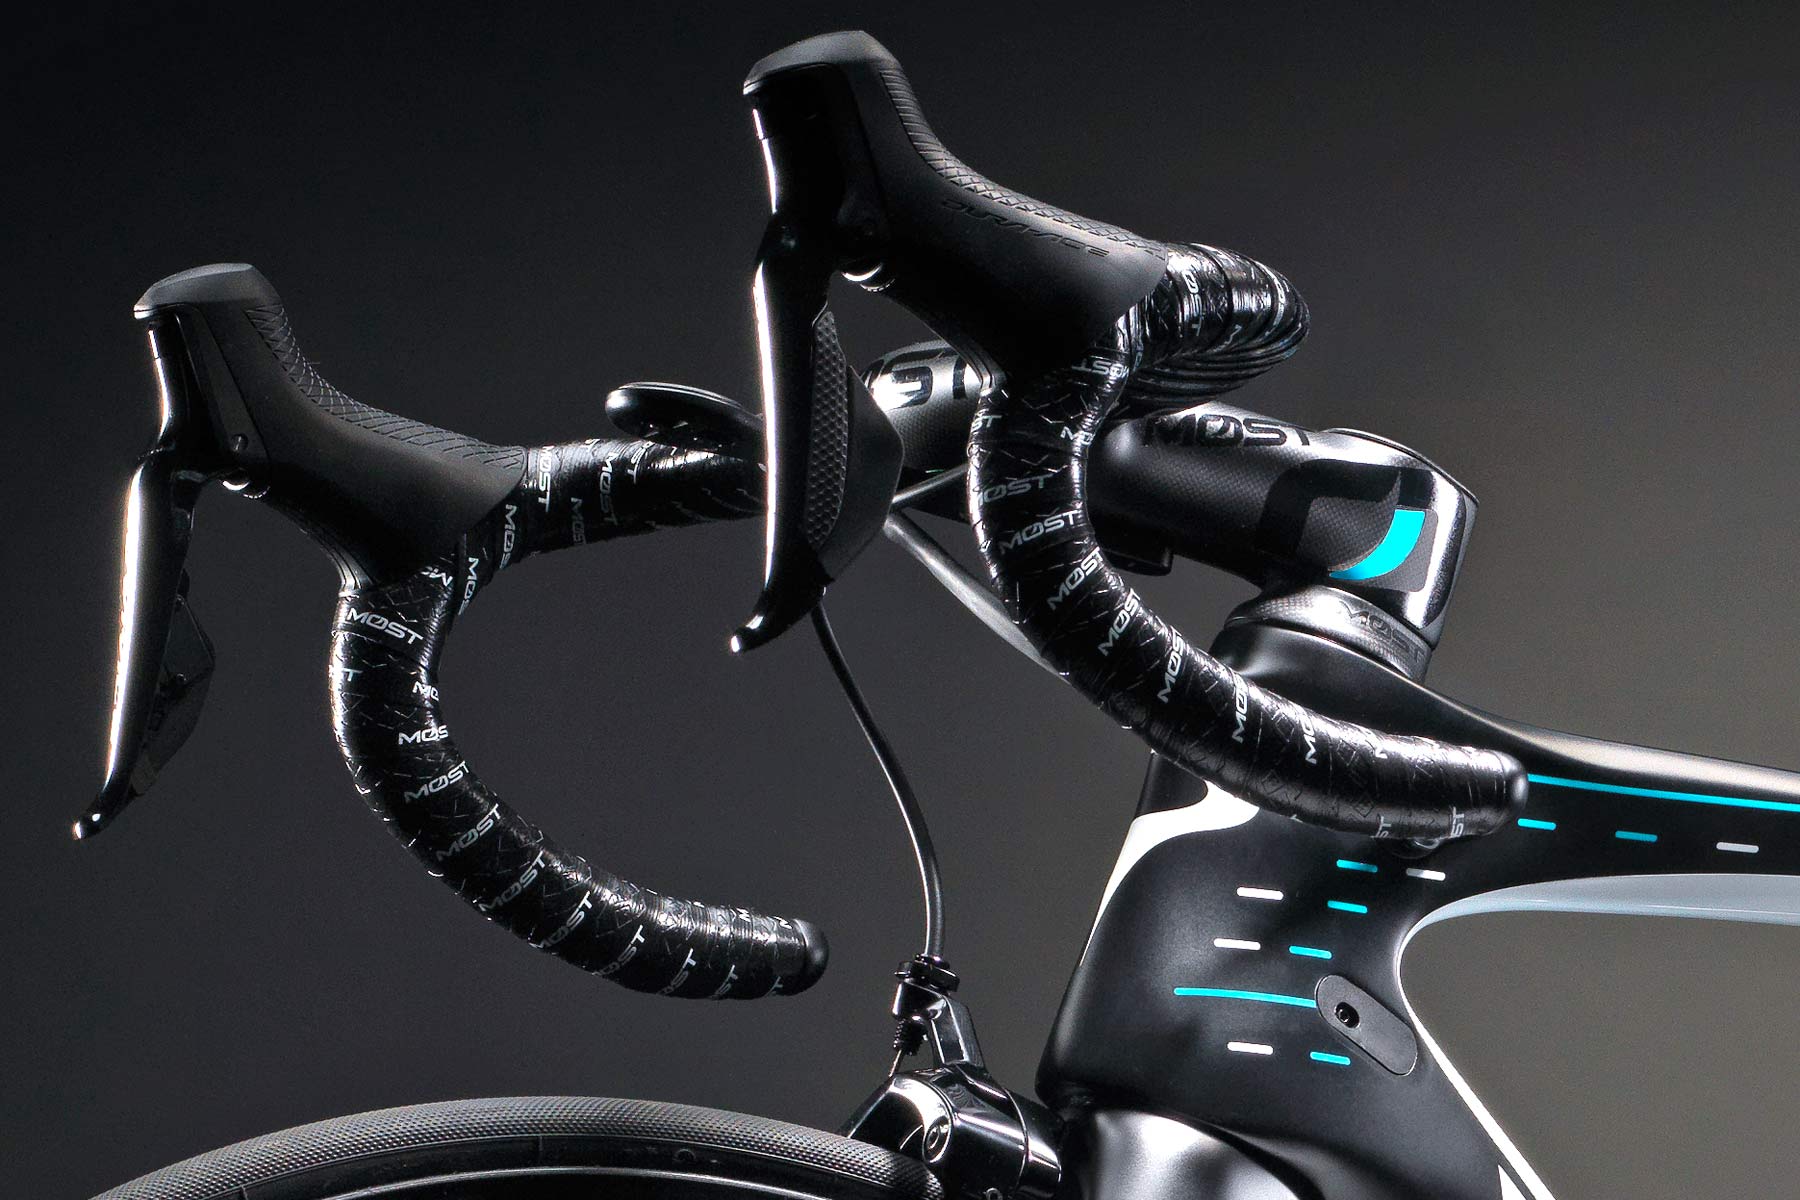 Pinarello stepping their MOST cockpit components up to the Team Sky big league